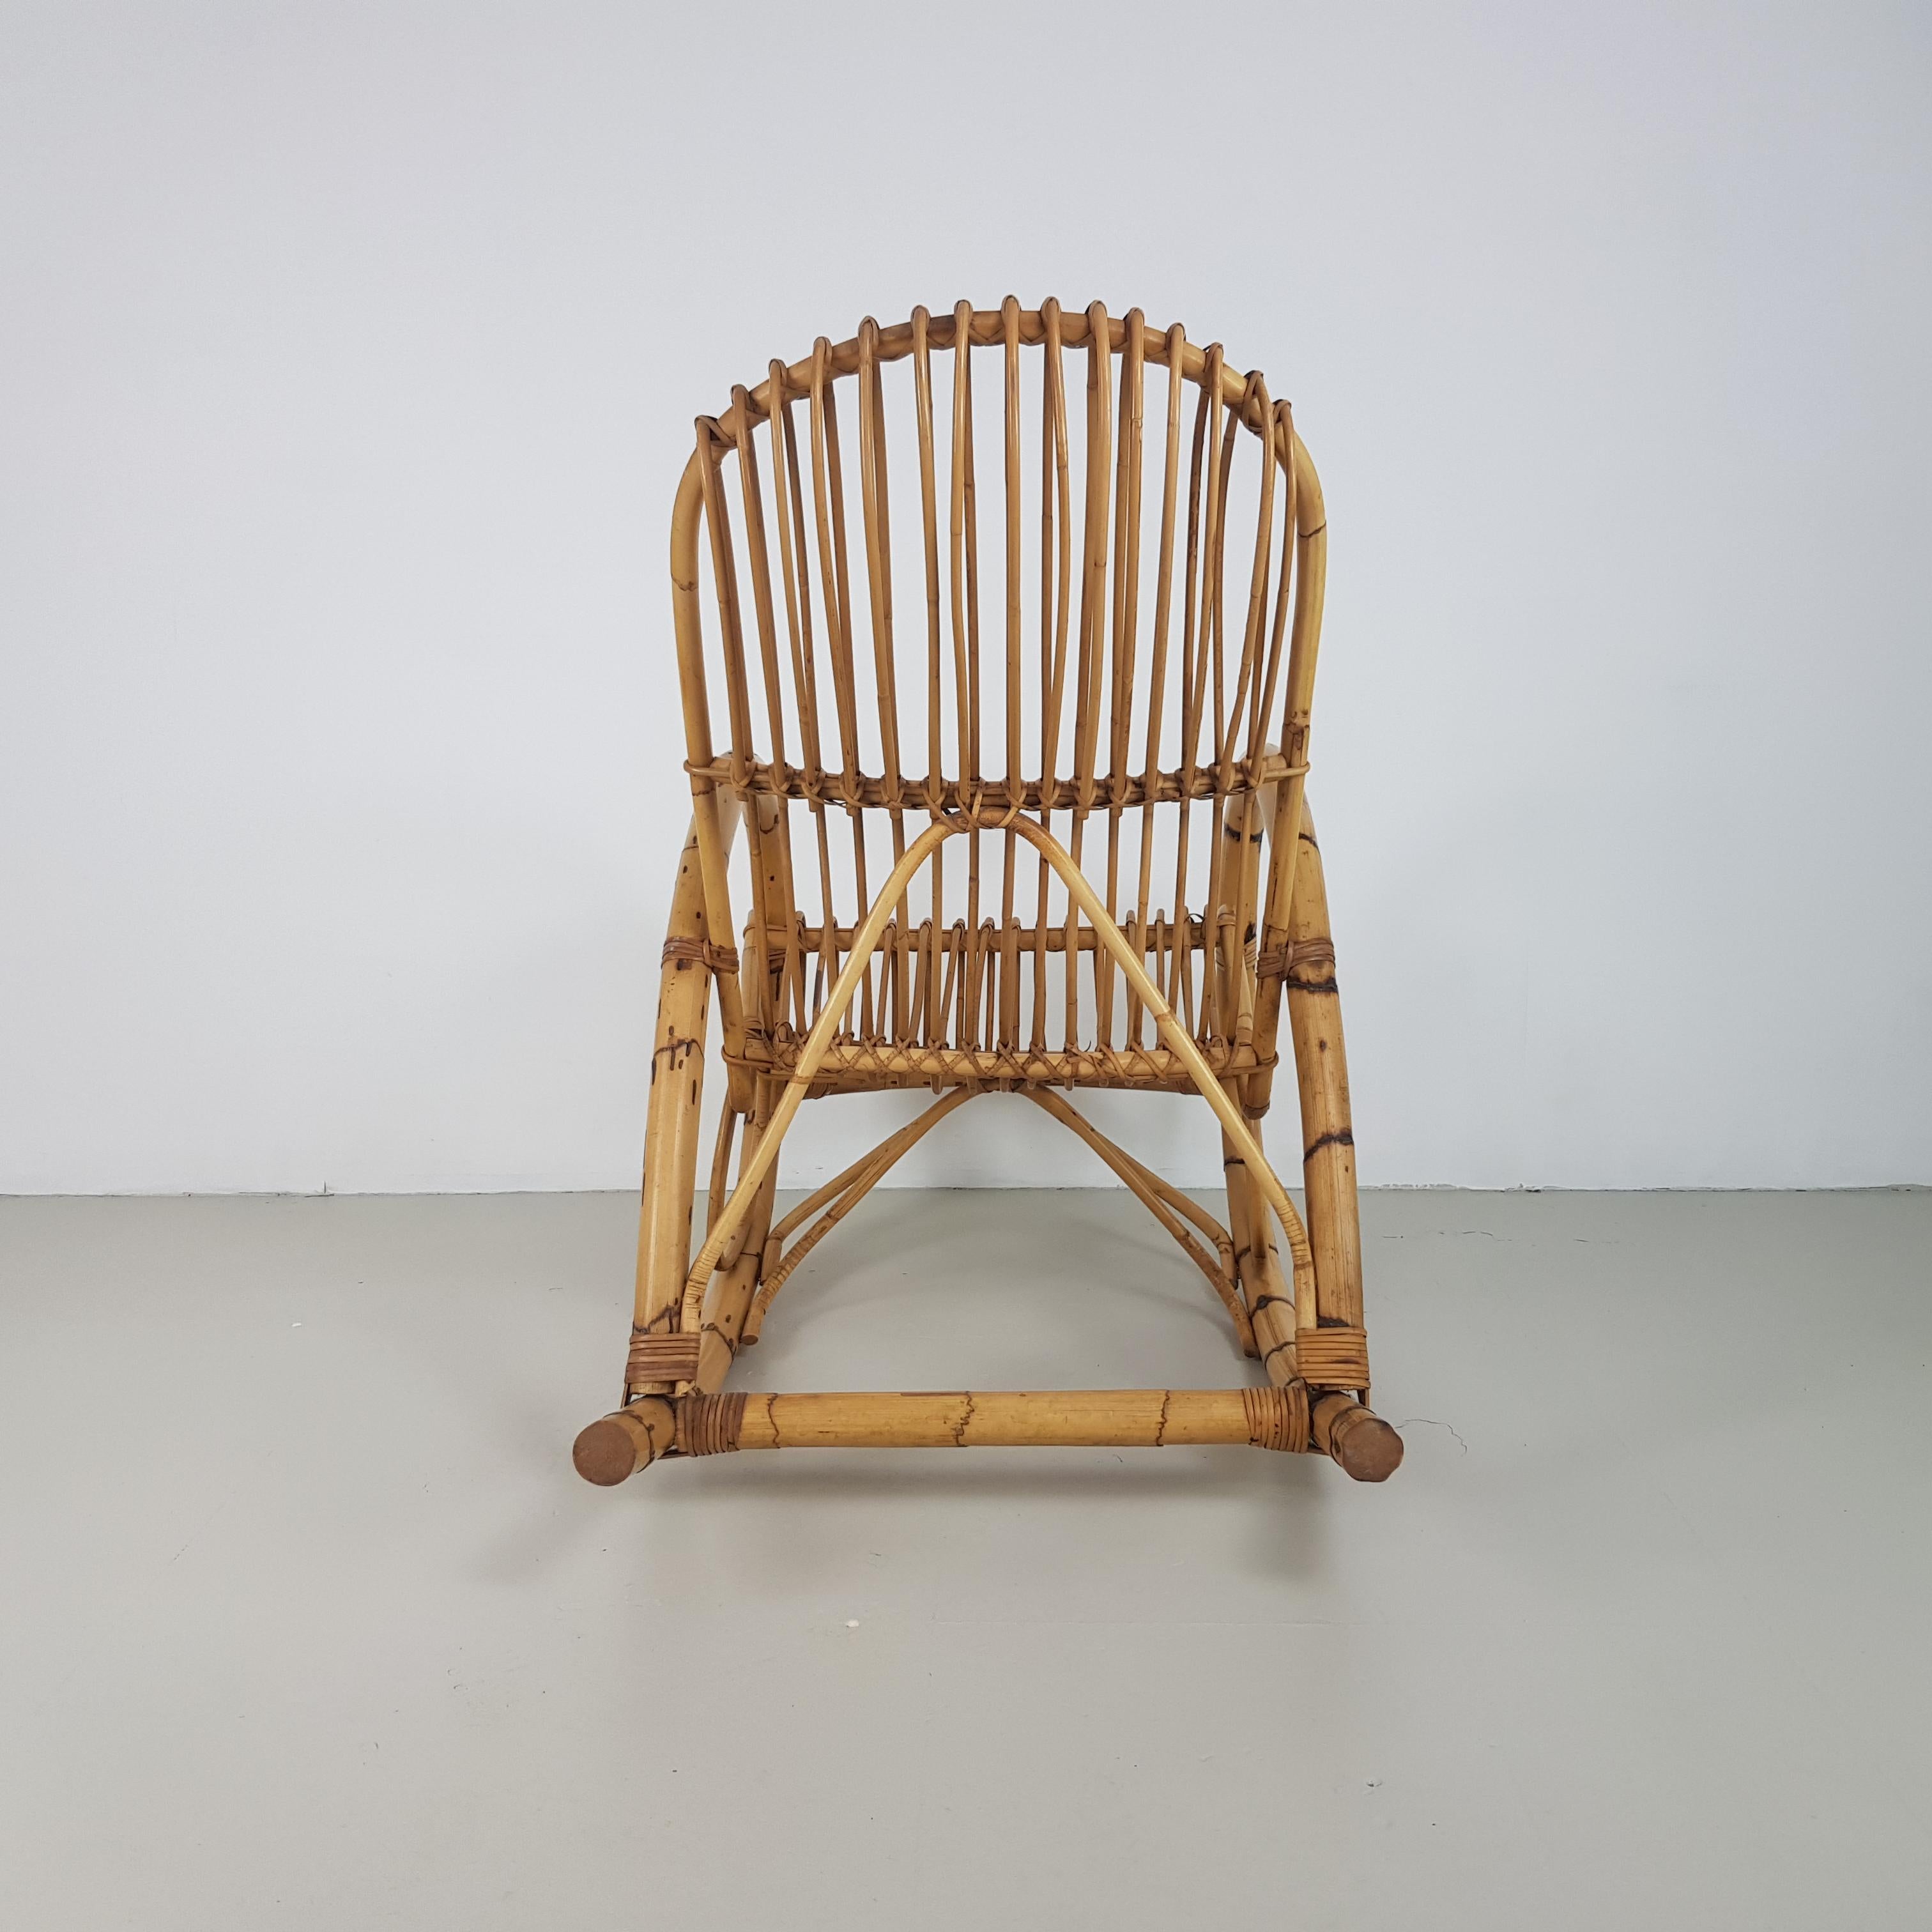 Vintage midcentury Franco Albini style rattan rocking chair.

Approximate dimensions:

Width: 60cm

Depth: 104cm

Height: 95cm

In good vintage condition.